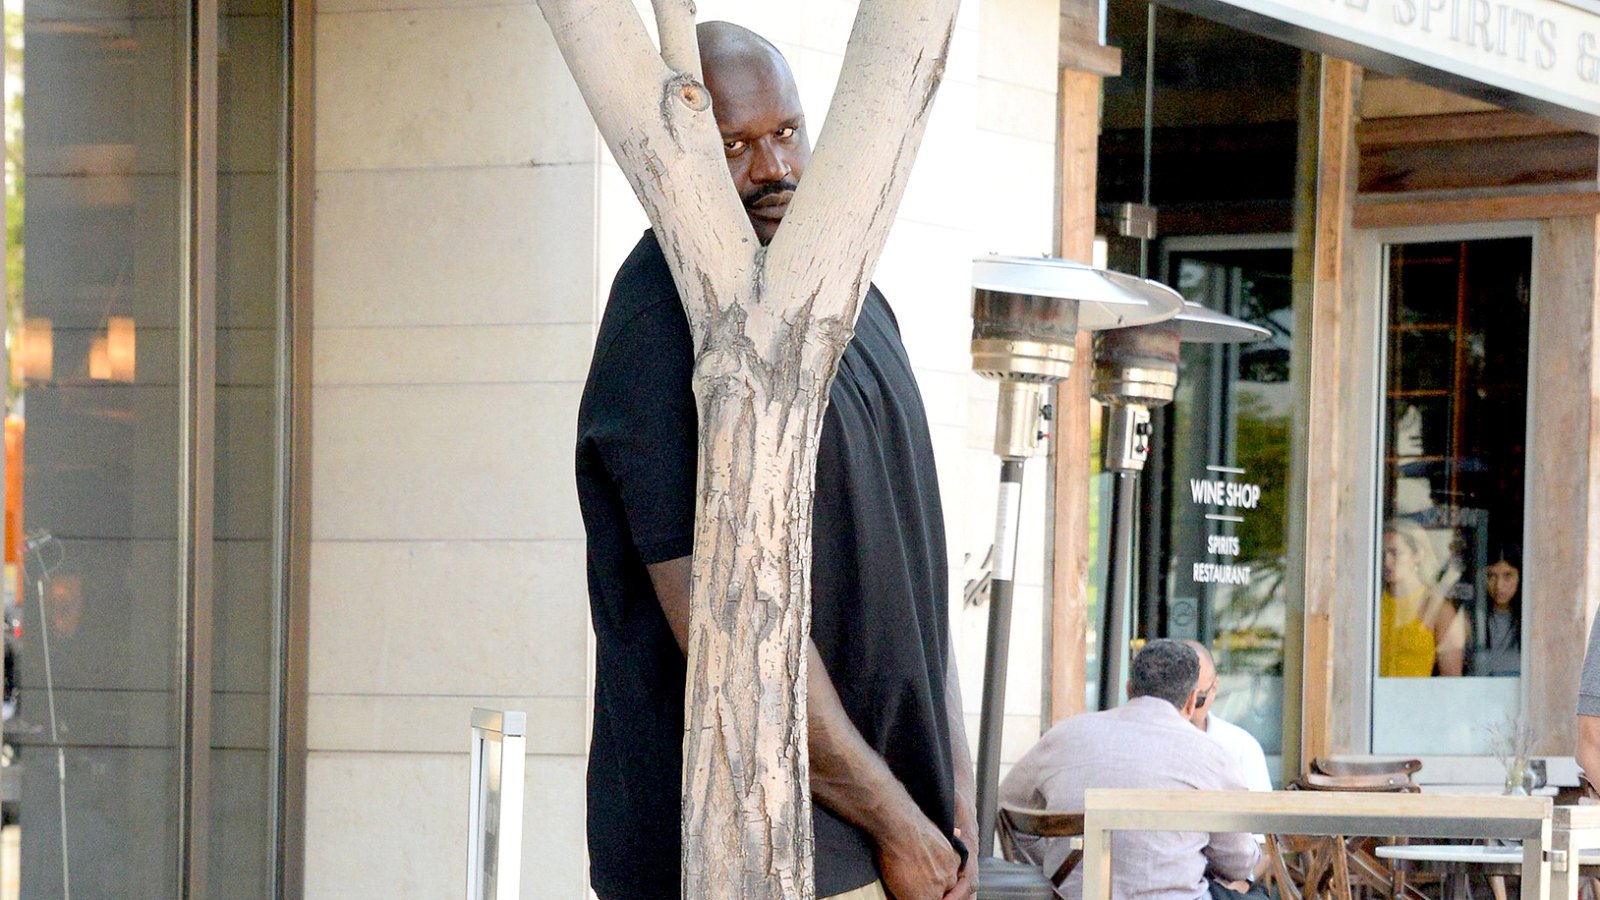 Shaquille O'Neal does his best to hide from paparazzi as he waits for his car after lunch at Wolfgang's Steakhouse in Beverly Hills.